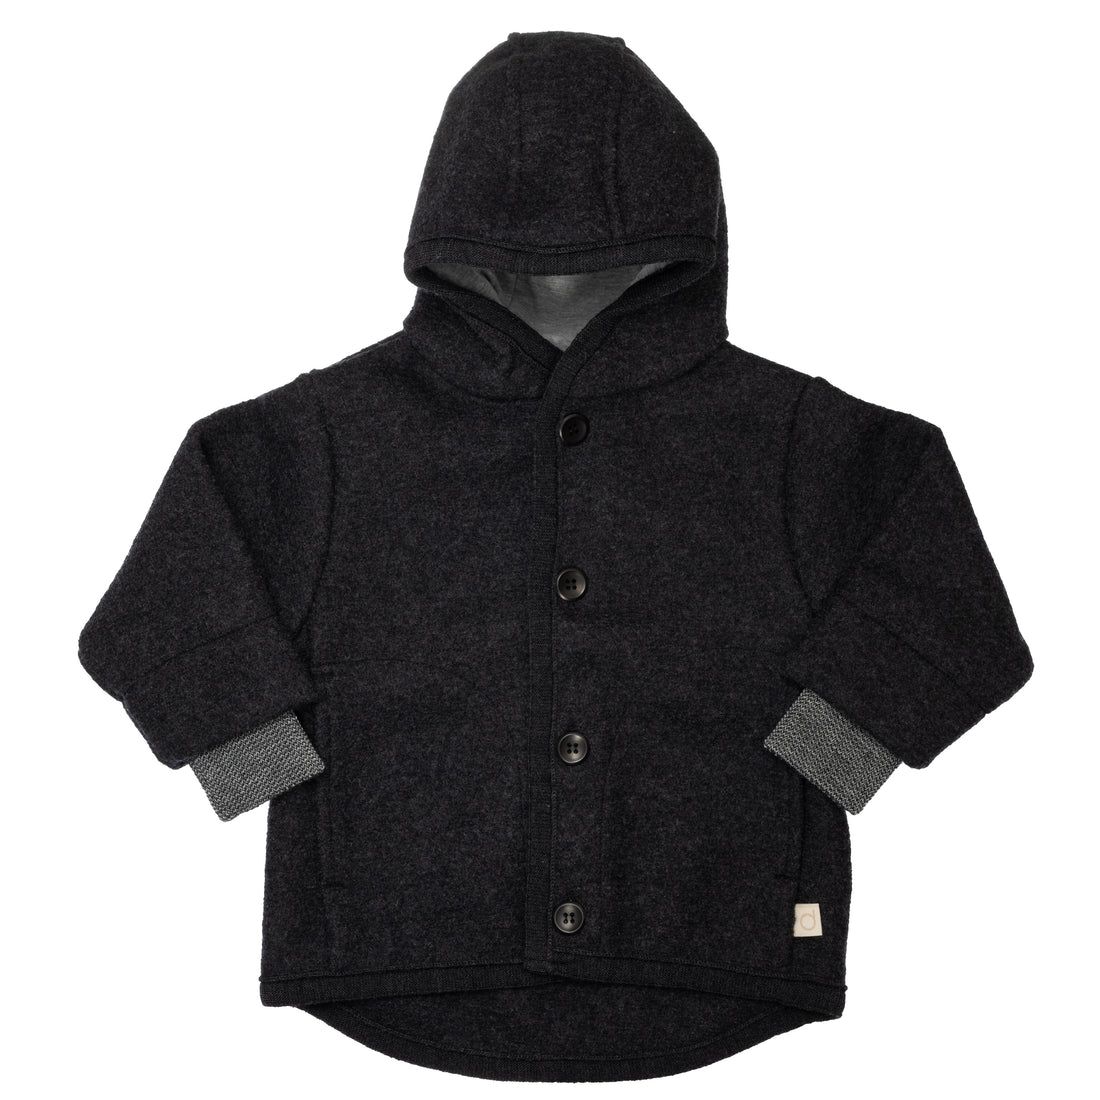 Disana Toddler/Child Hooded Jacket, Organic Merino Boiled Wool – Warmth and  Weather